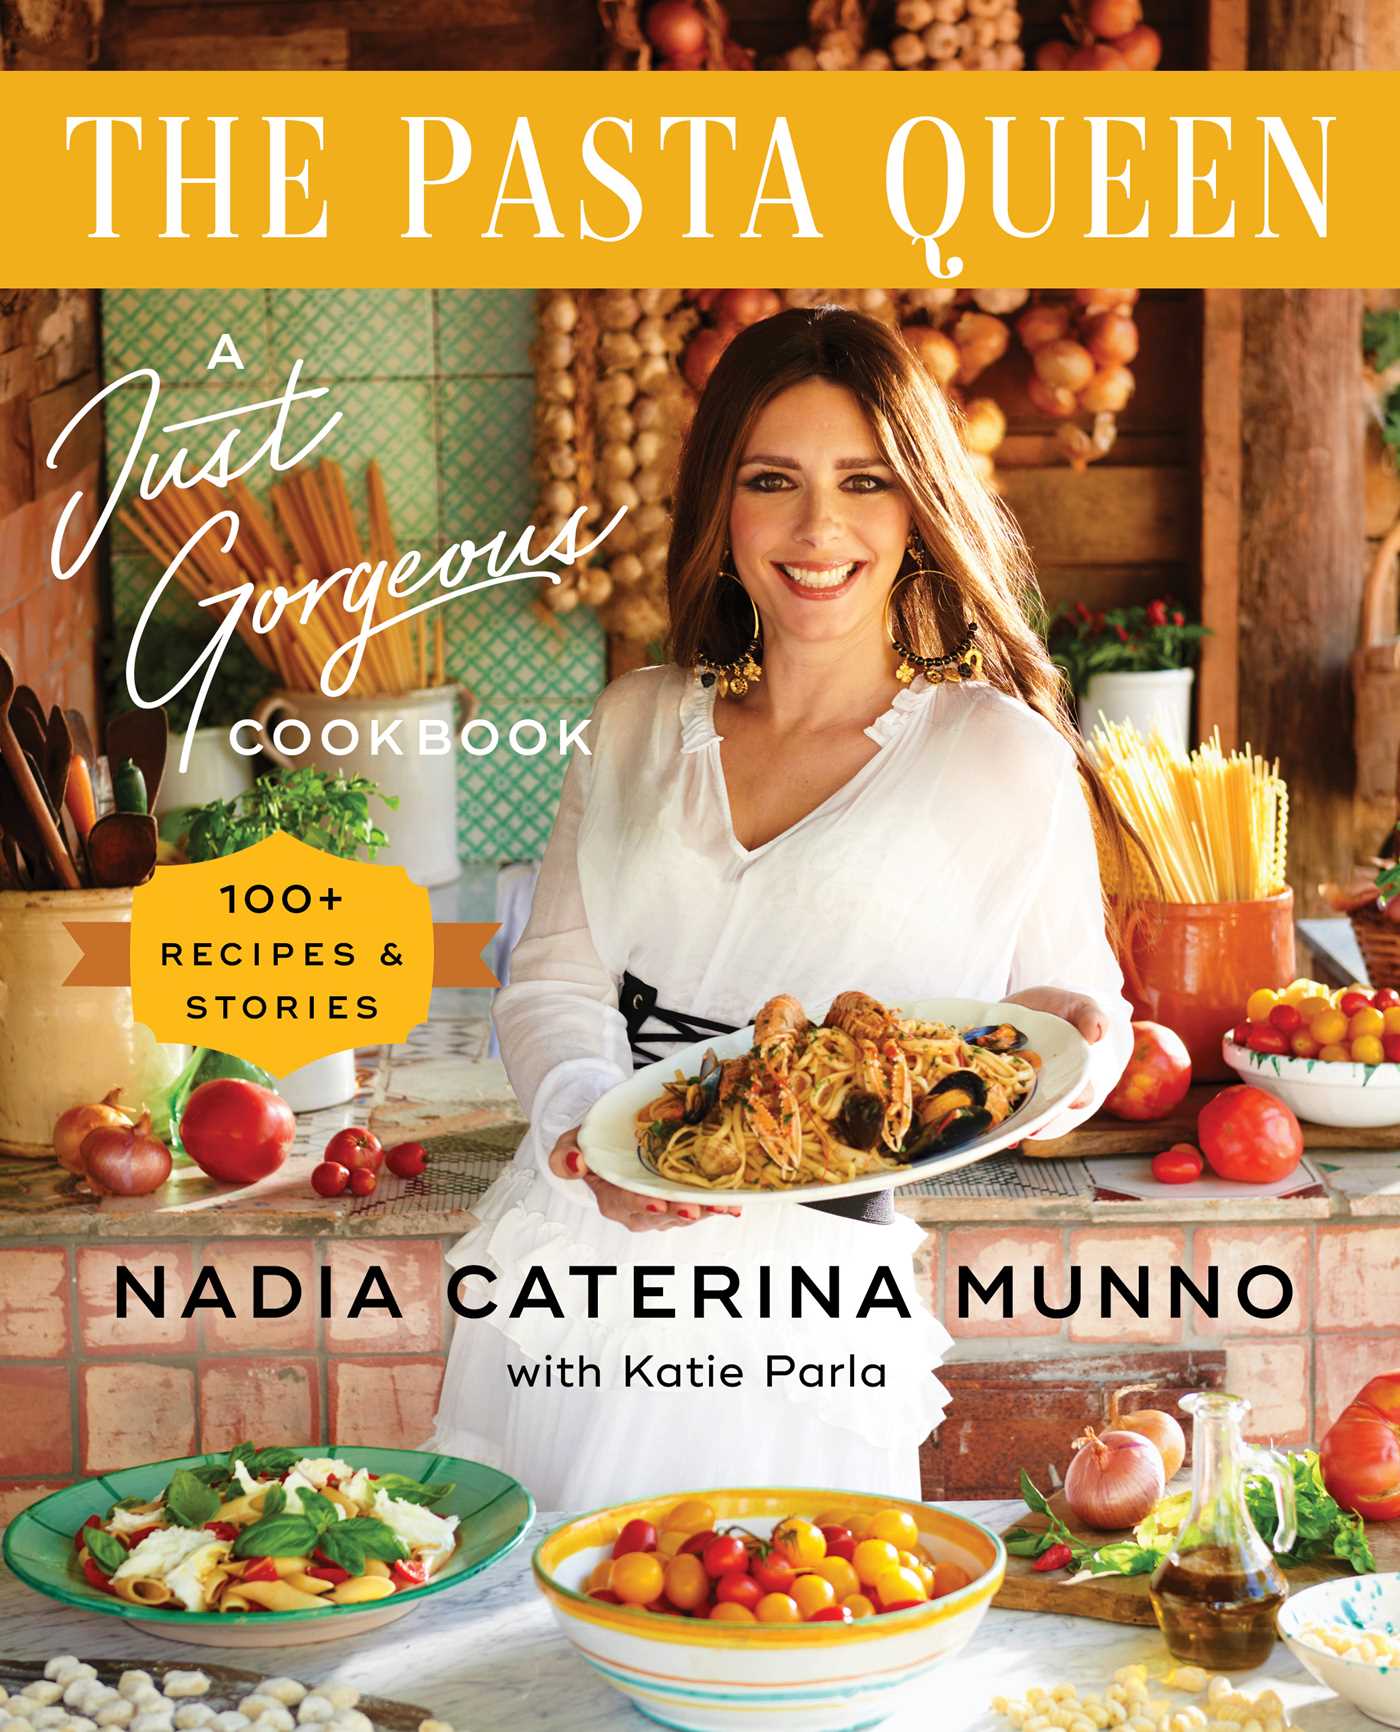 The Pasta Queen : A Just Gorgeous Cookbook: 100+ Recipes and Stories | Cookbook